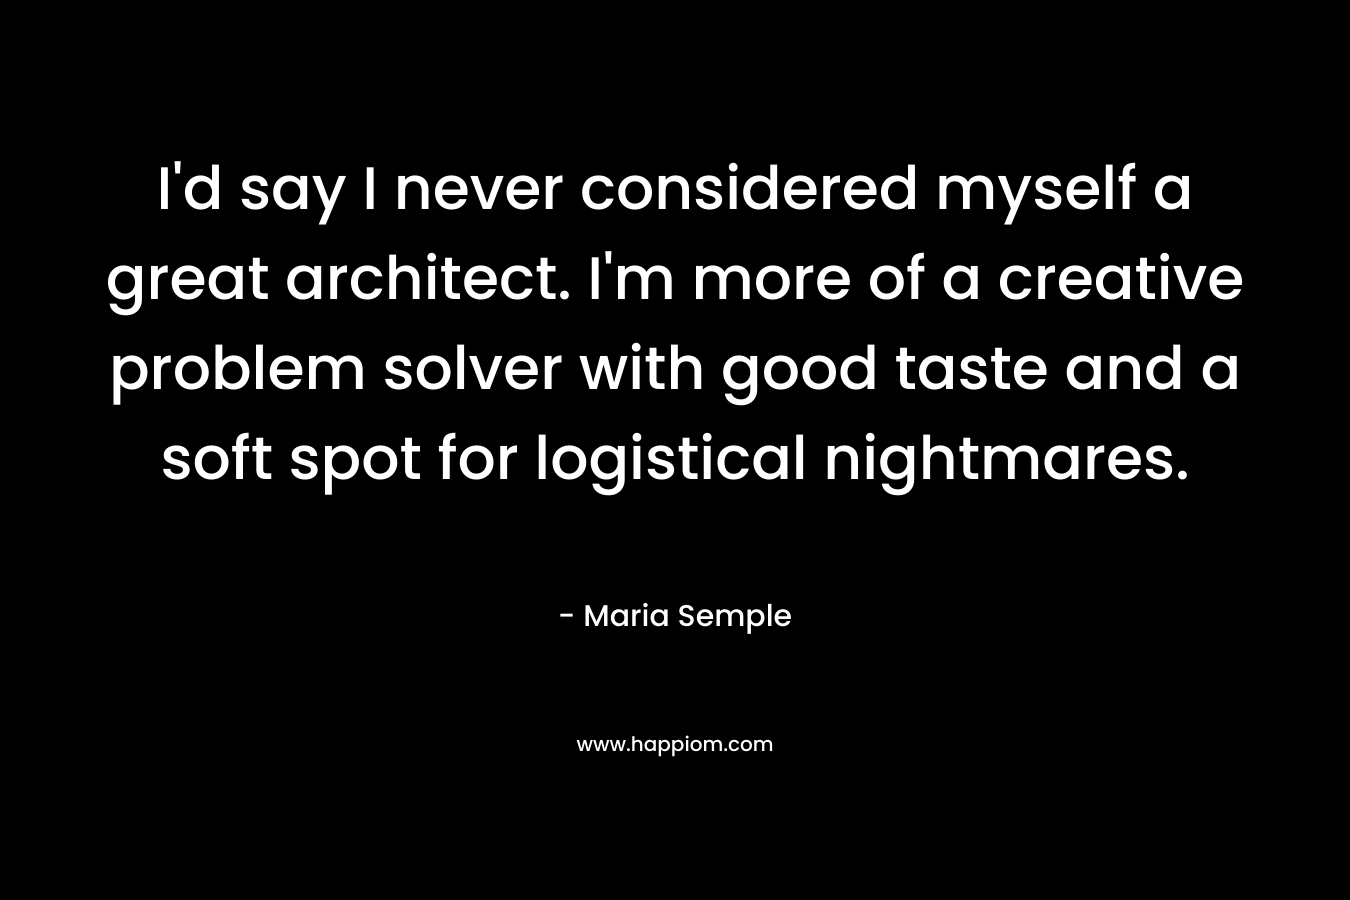 I'd say I never considered myself a great architect. I'm more of a creative problem solver with good taste and a soft spot for logistical nightmares.